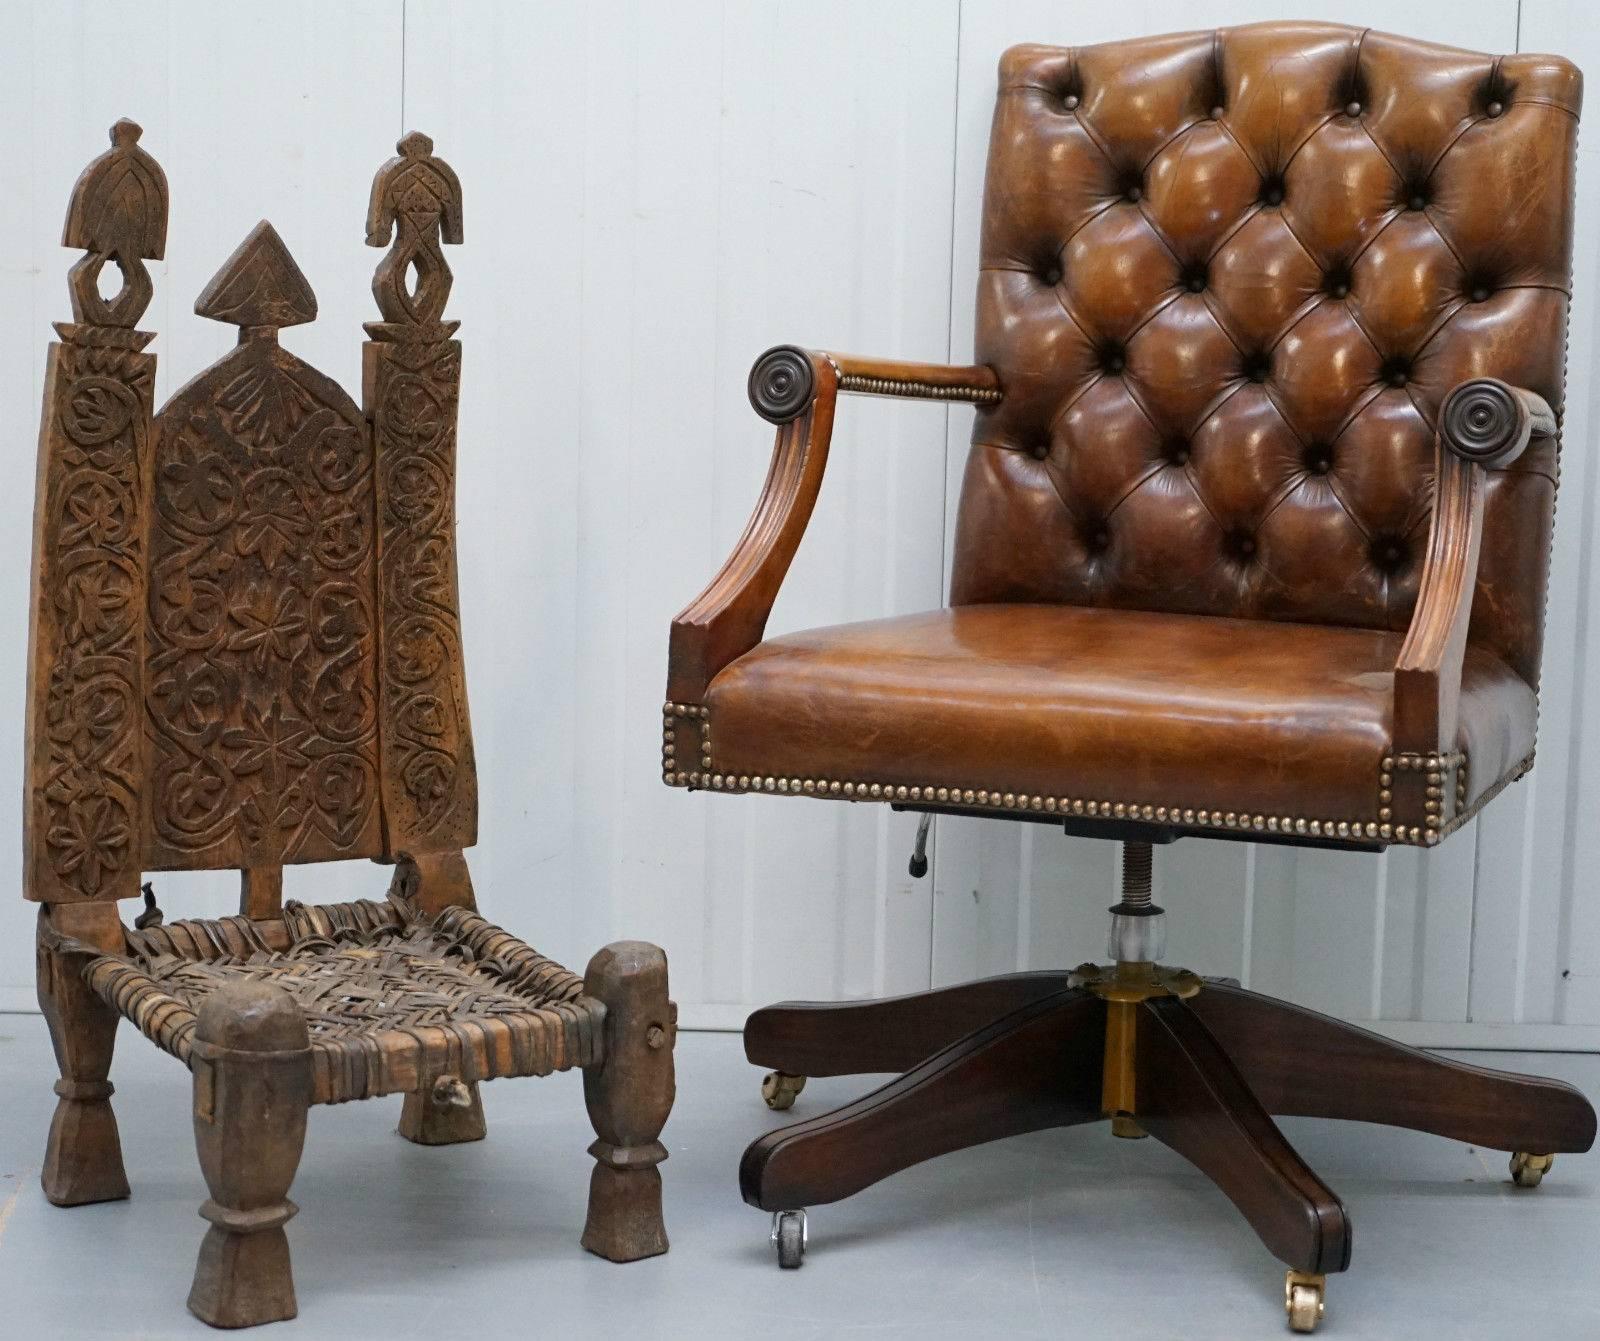 We are delighted to offer for sale this lovely antique 19th century circa 1820 oriental vintage cedar wood chair from Nuristan Afghanistan / Swat valley-Pakistan Nr-K

A really very artistic piece, to small and delicate to be used as a chair in